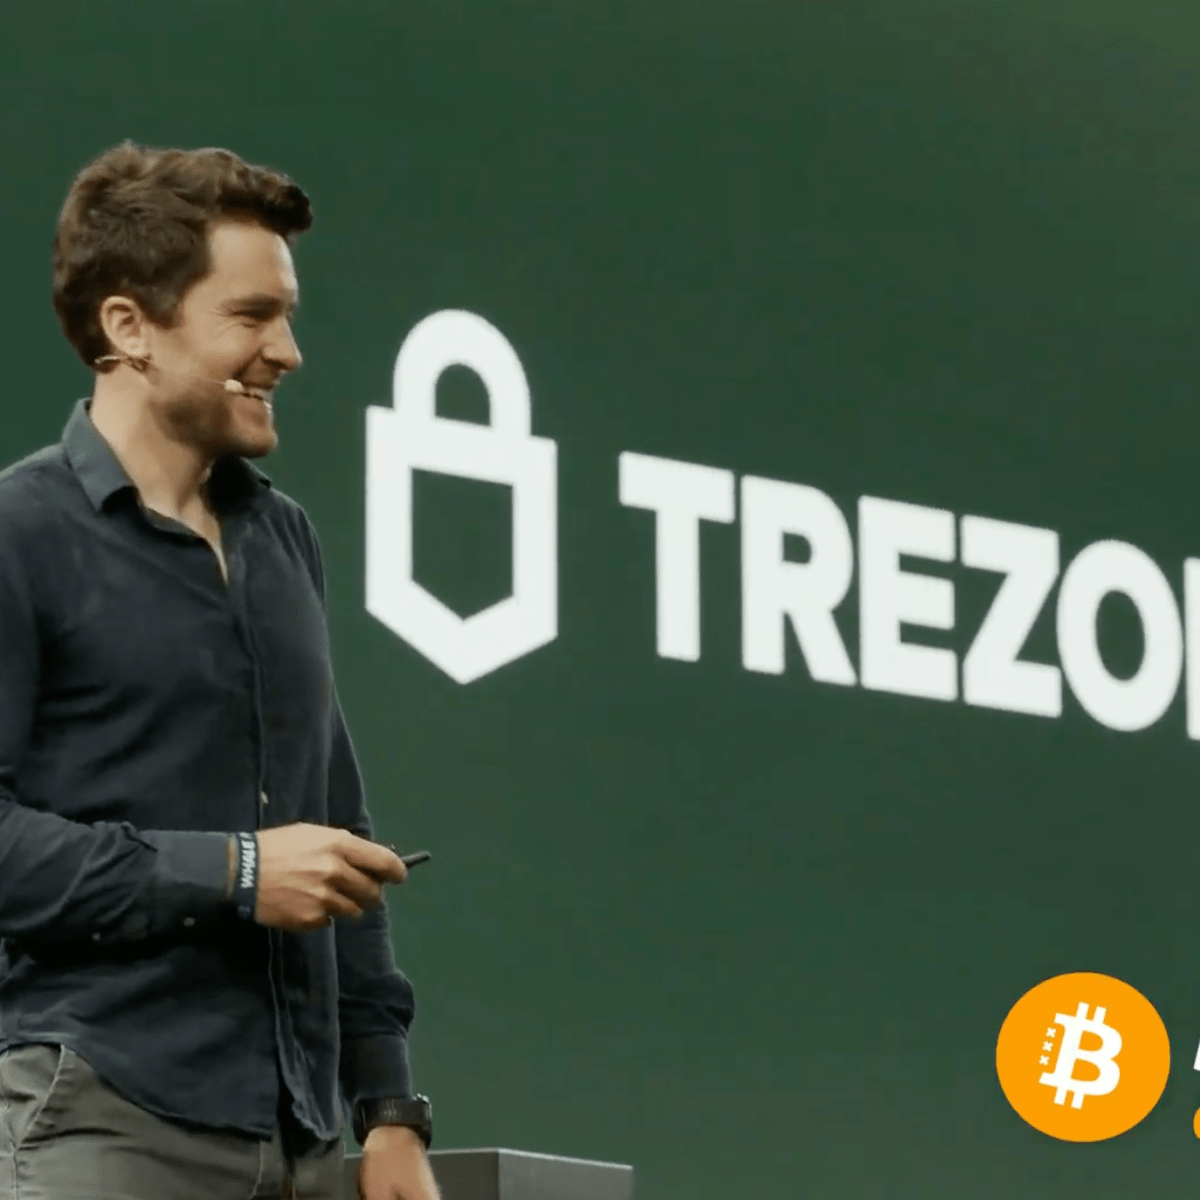 Trezor Expands Privacy Features, Introduces Coinjoin For Trezor Model One -  Bitcoin Magazine - Bitcoin News, Articles and Expert Insights